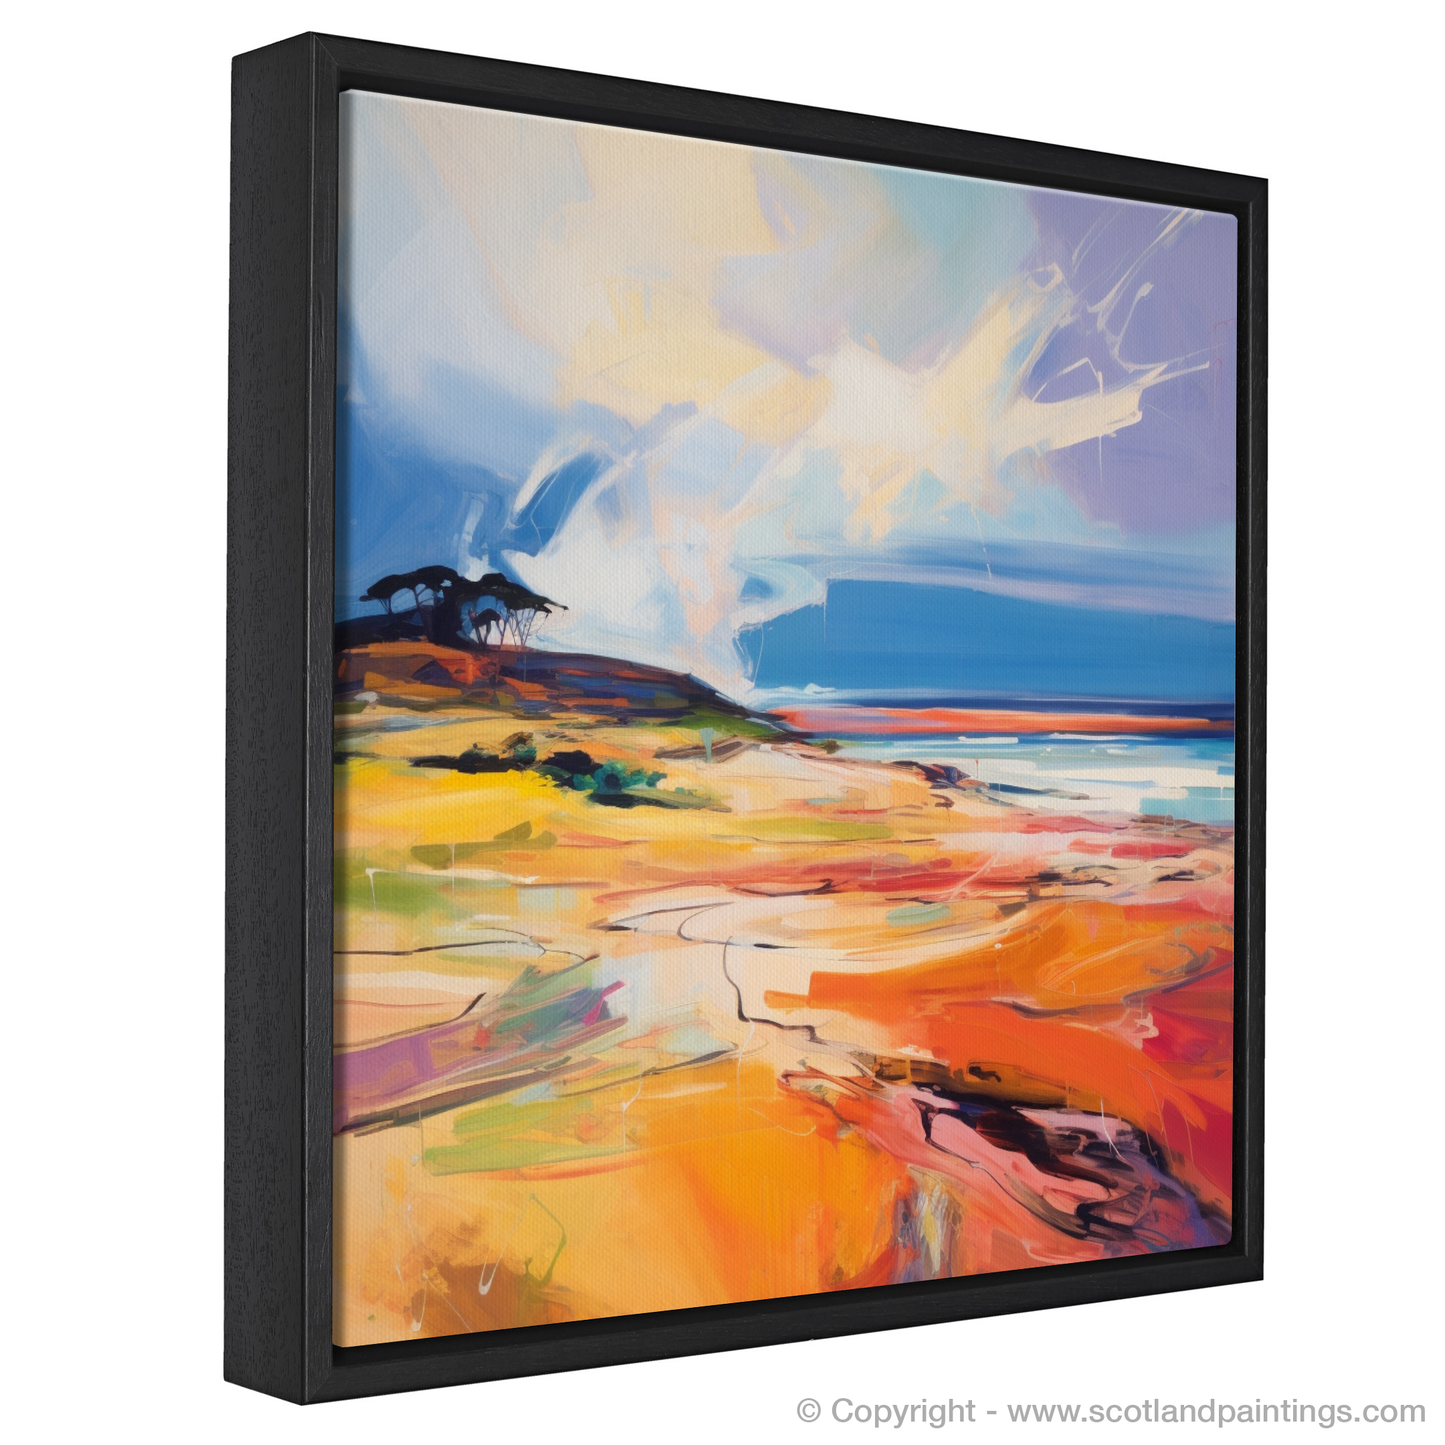 Gullane Sands Reimagined: An Abstract Expressionist Journey